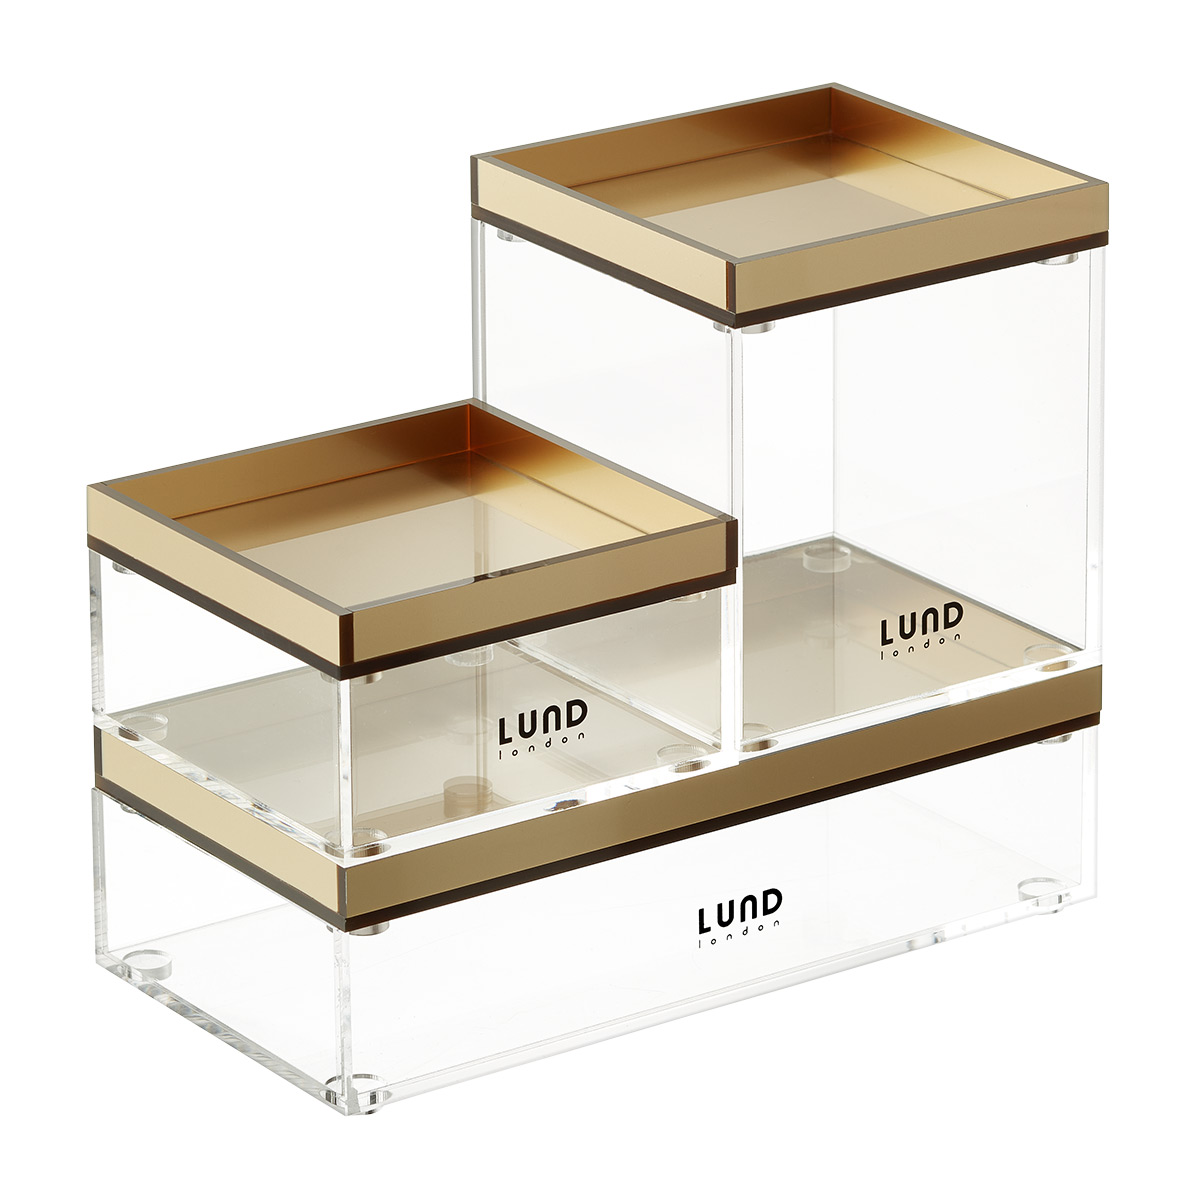 Lund London Blair Acylic Desktop Stacking Organizers | The Container Store